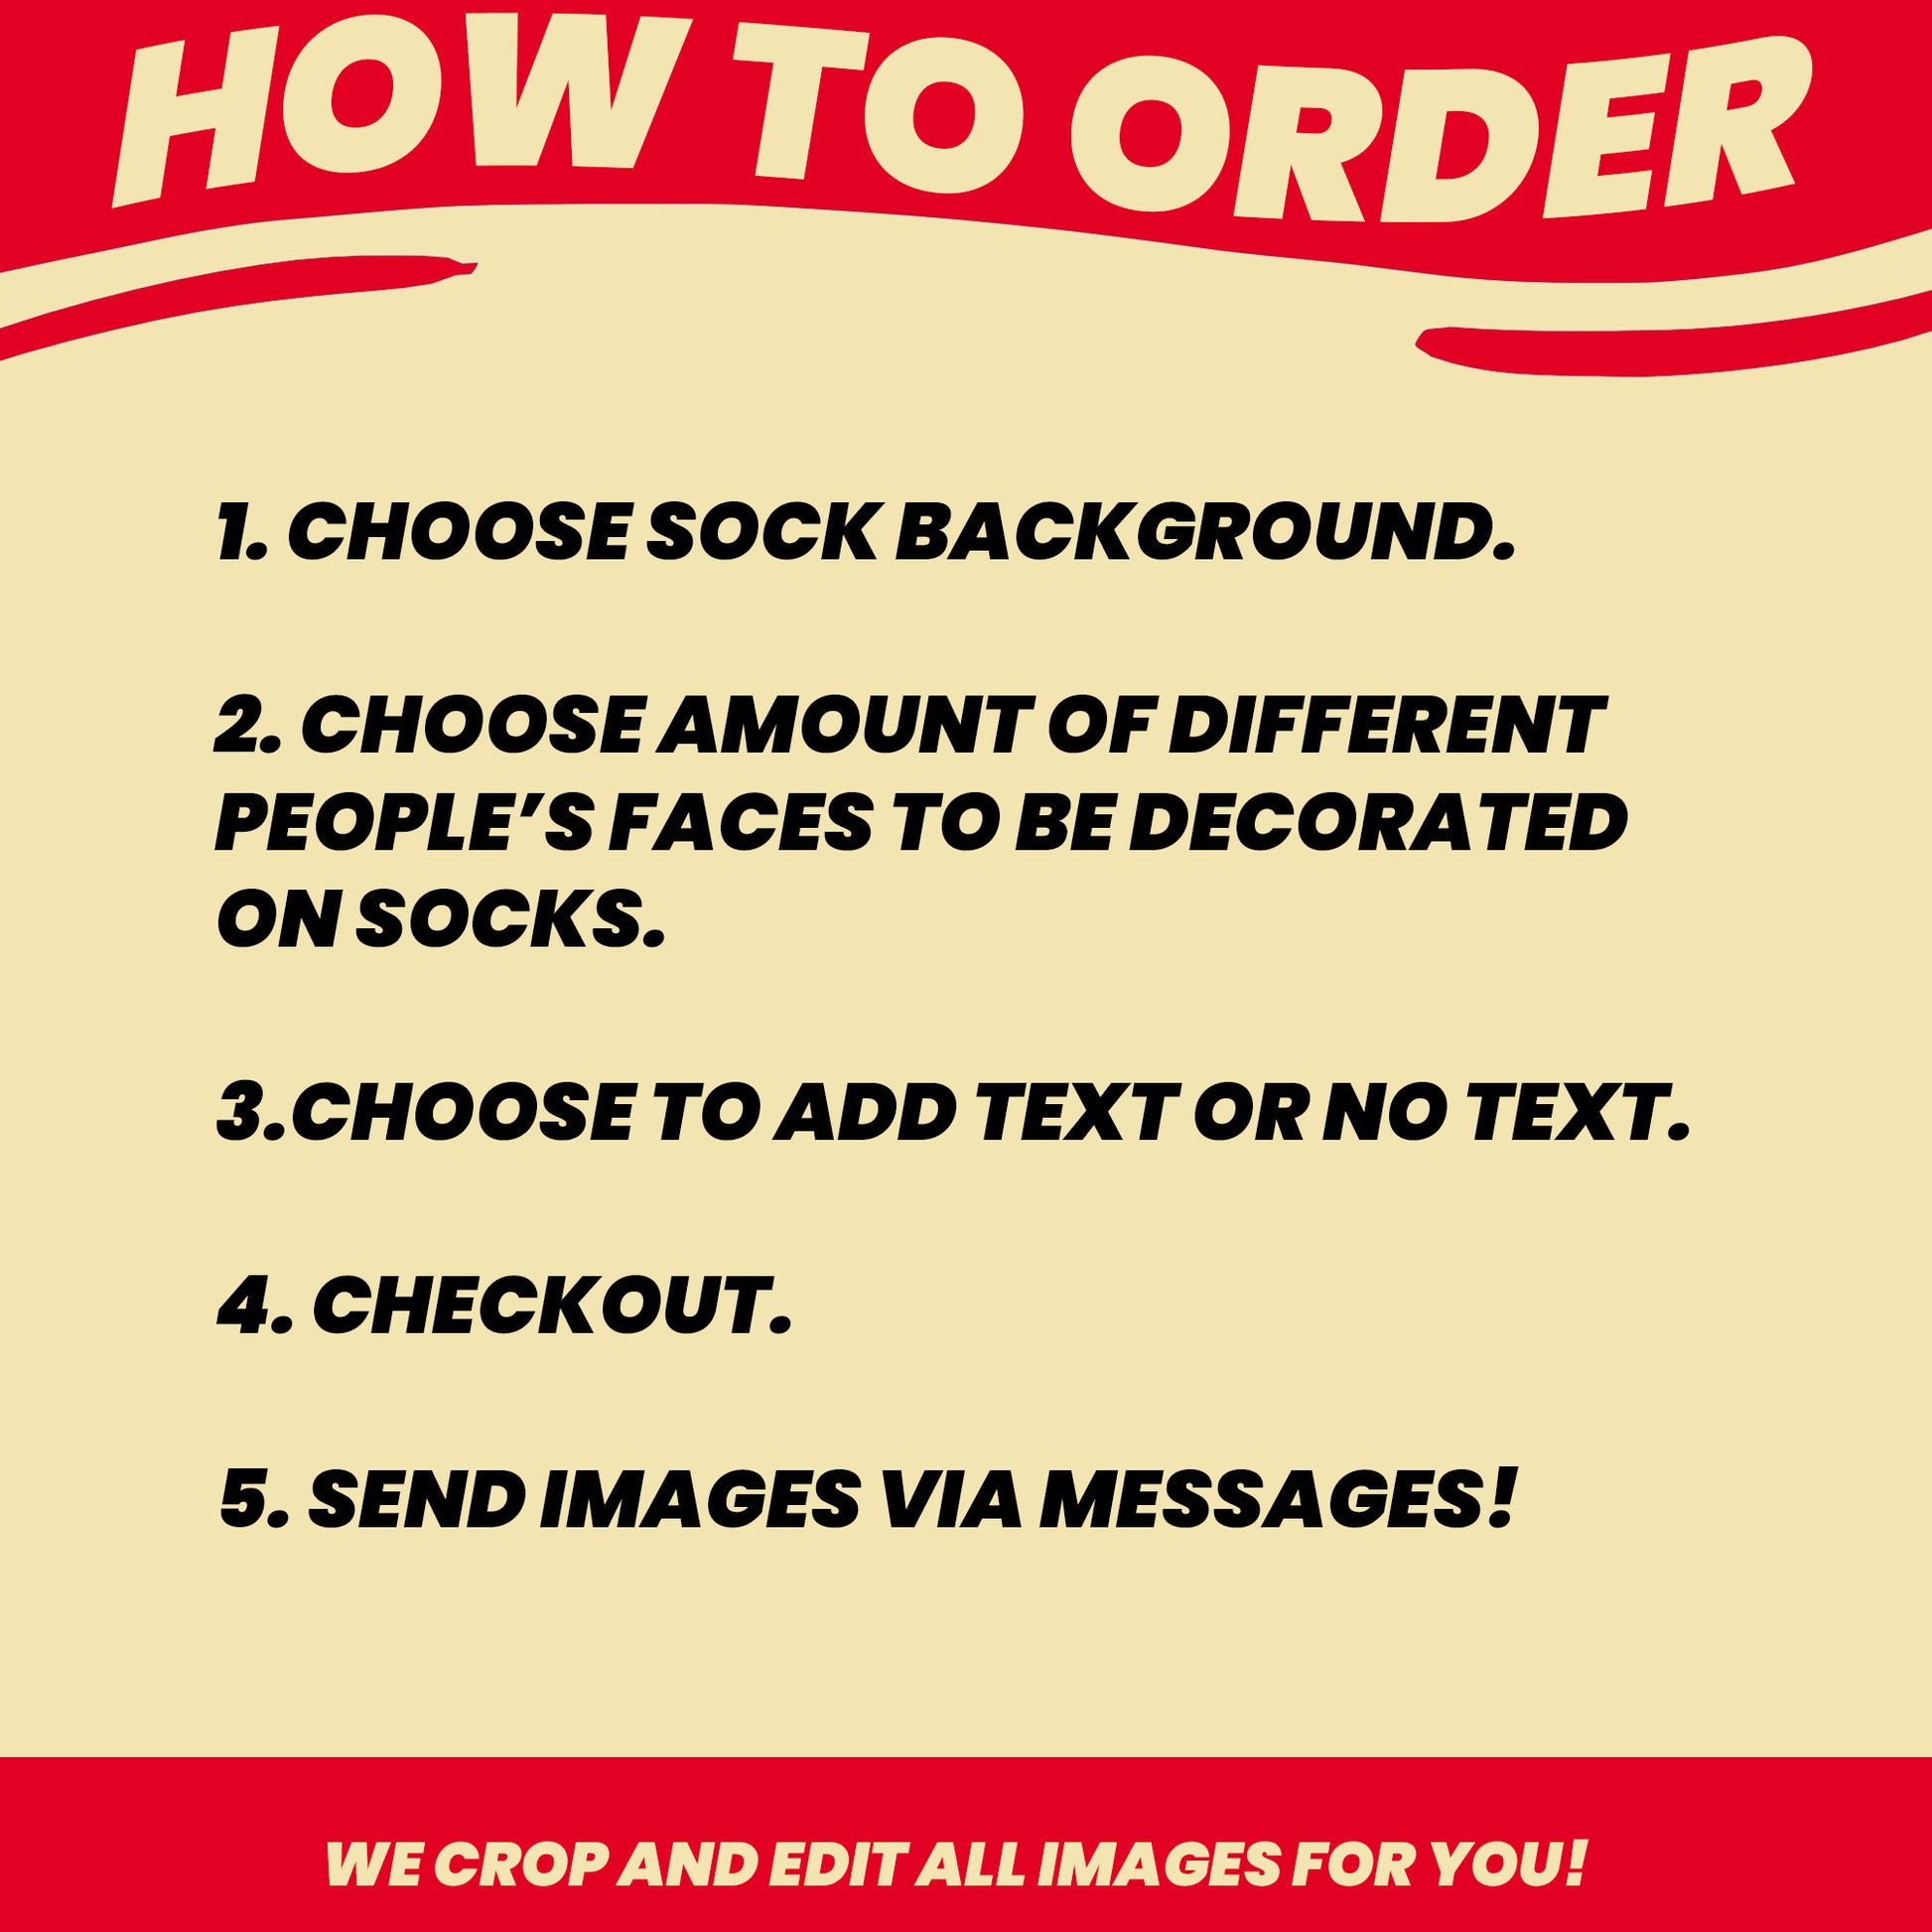 personalized hawaiian shirt style socks with your design, instructions on how to order.